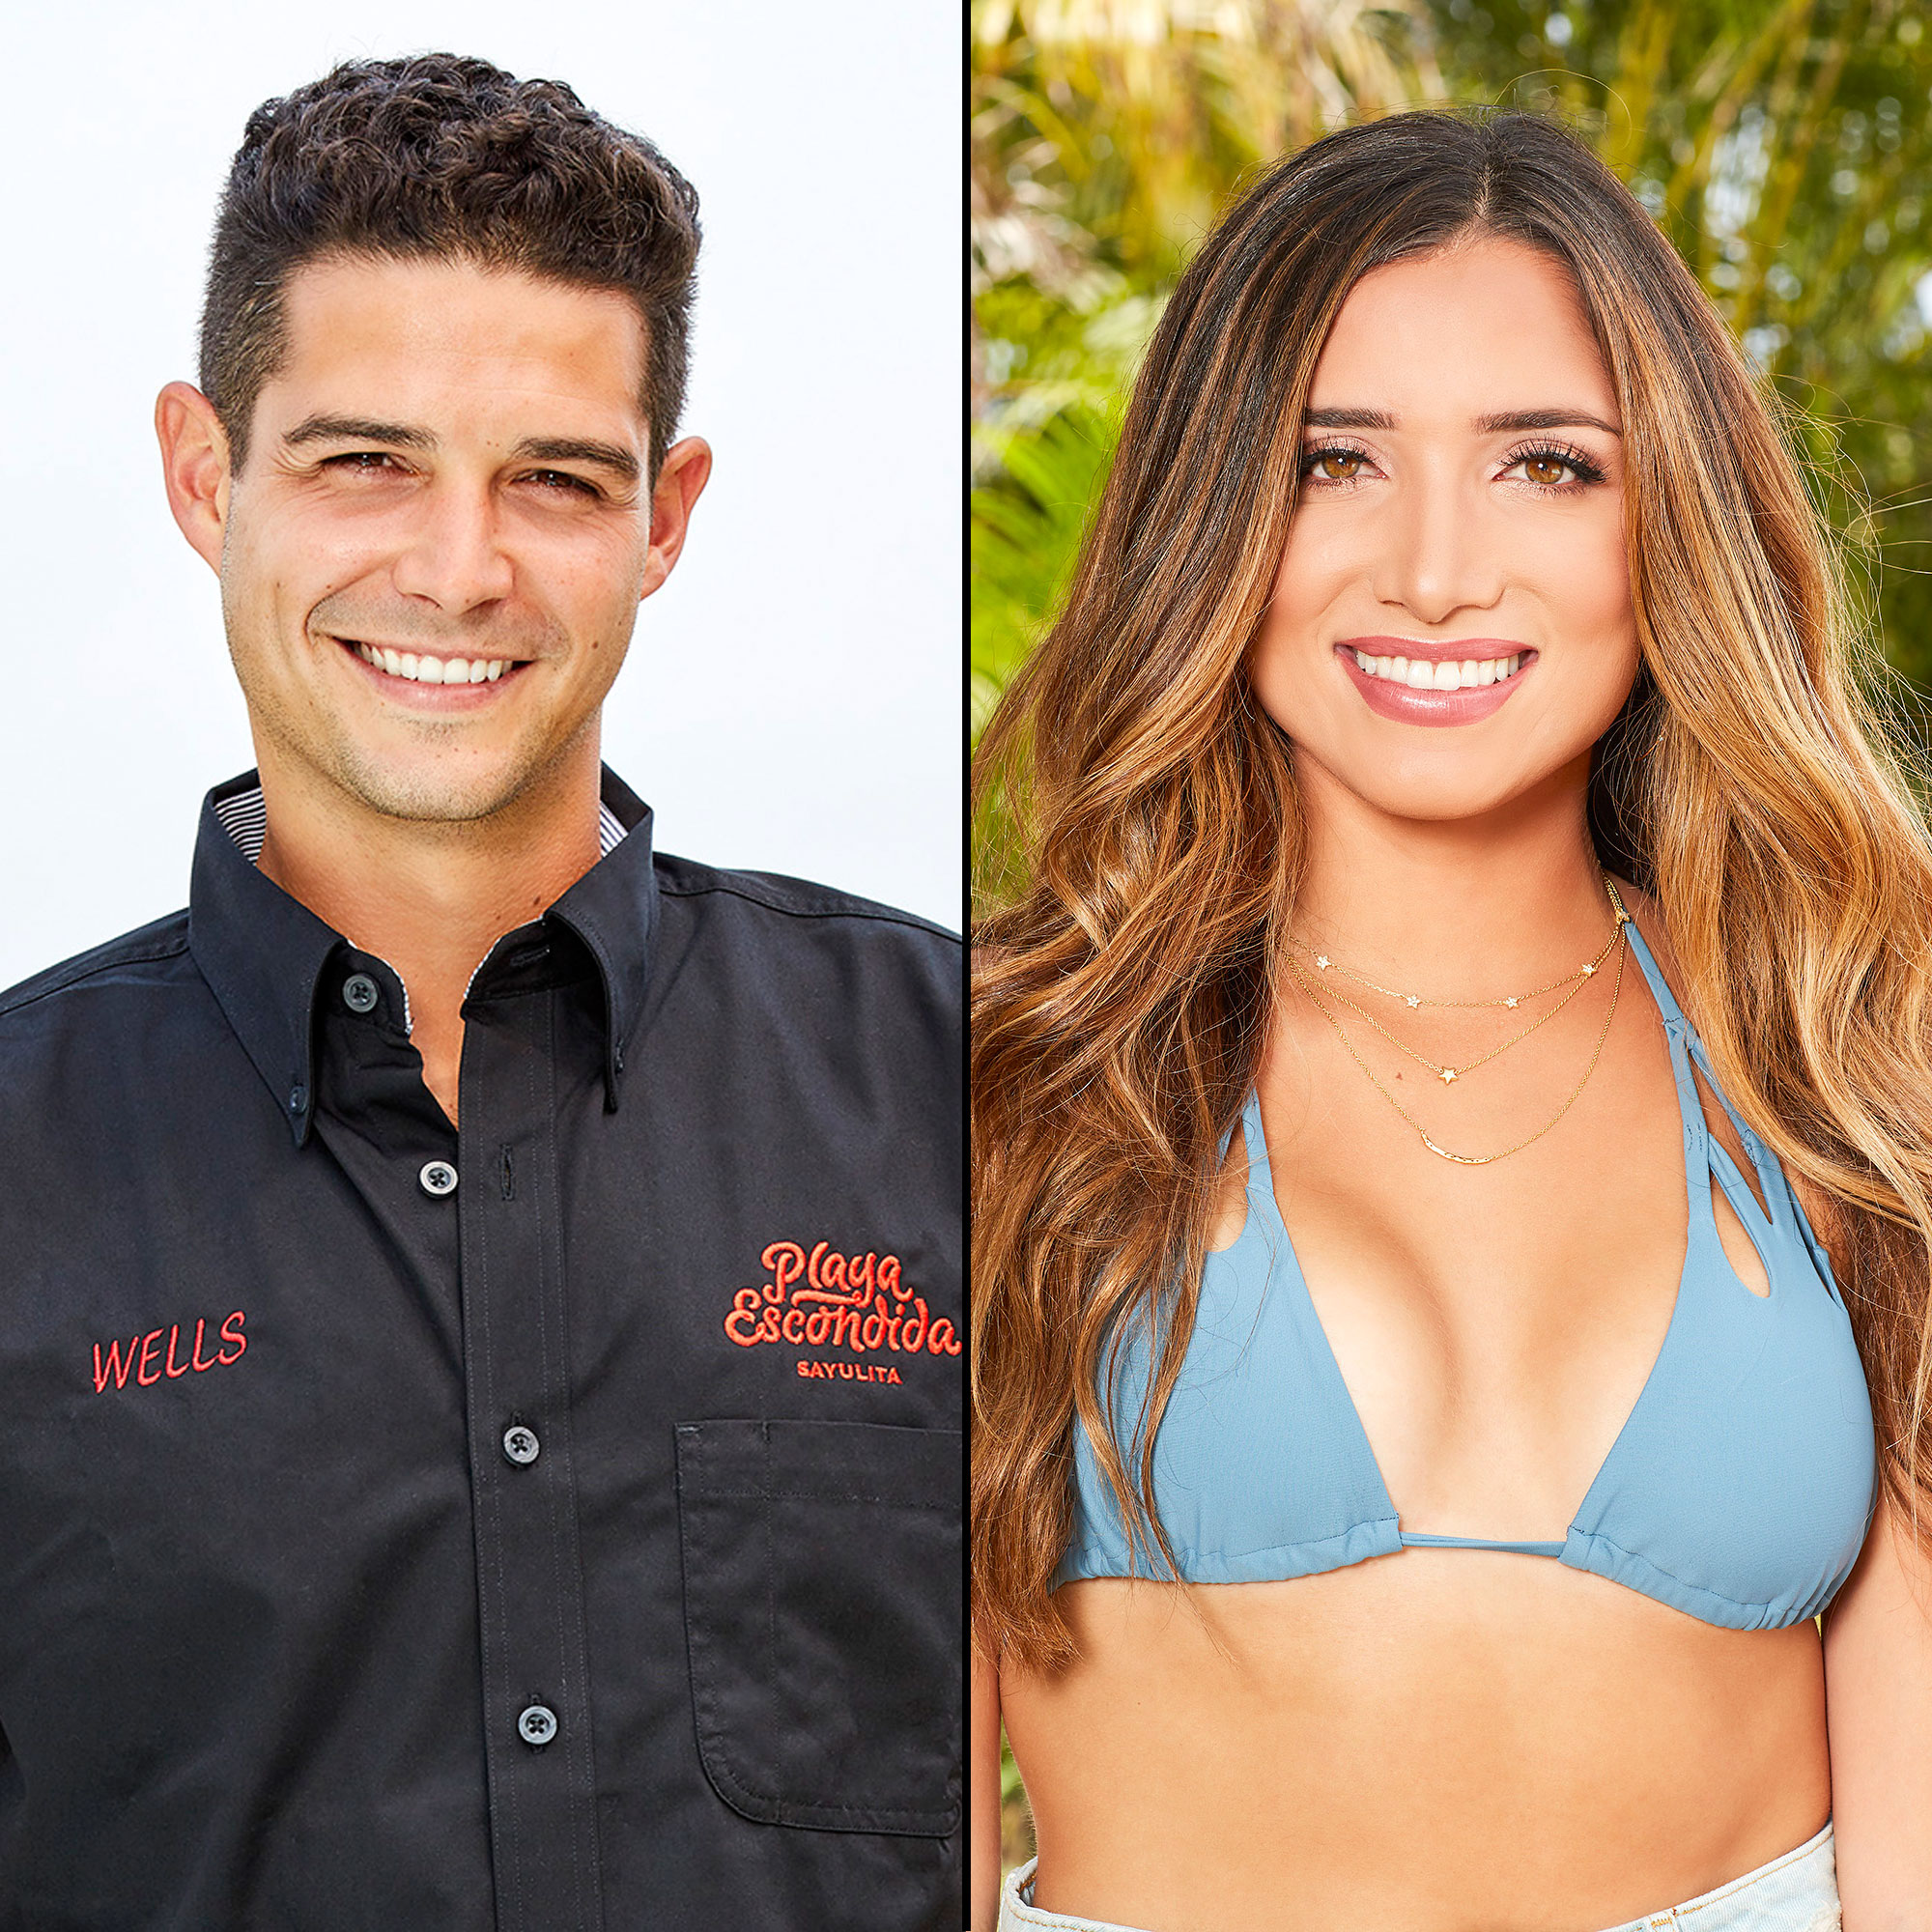 Bachelor Alum Already Have Thoughts on the Season 24 Cast Adult Picture